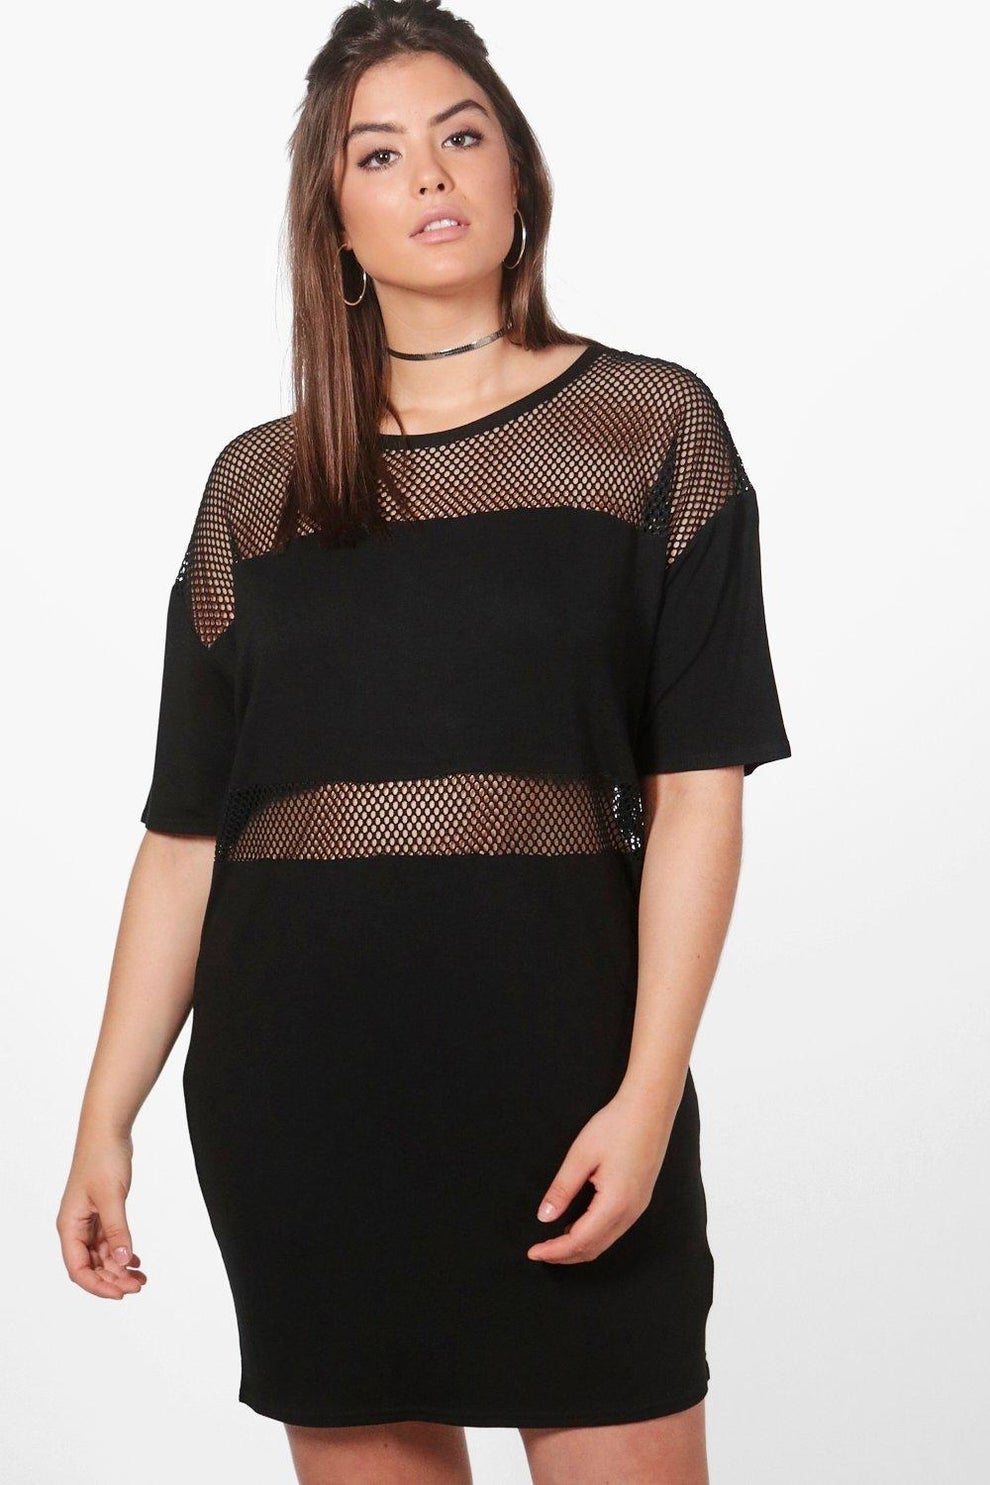 28 Beautiful Things From Boohoo You Should Add To Your Cart ASAP